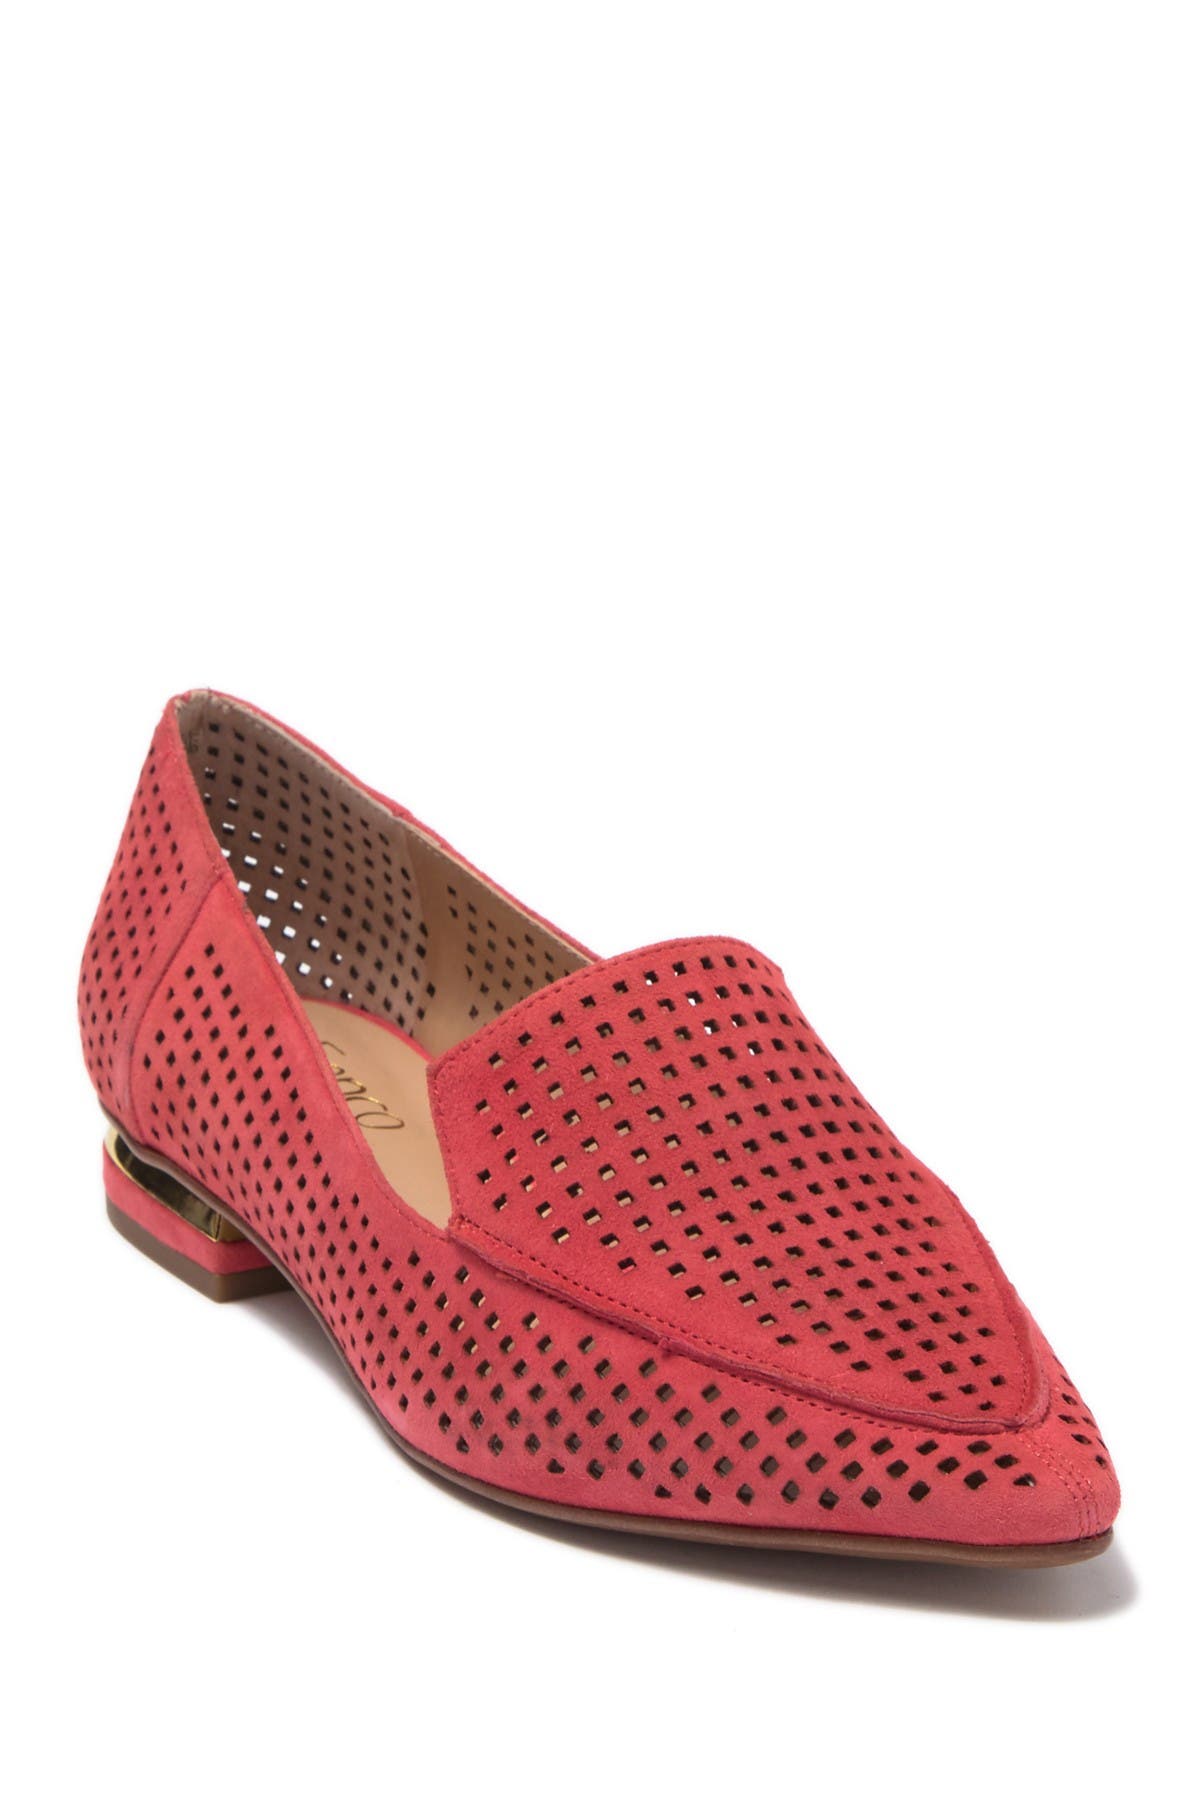 franco sarto perforated loafers